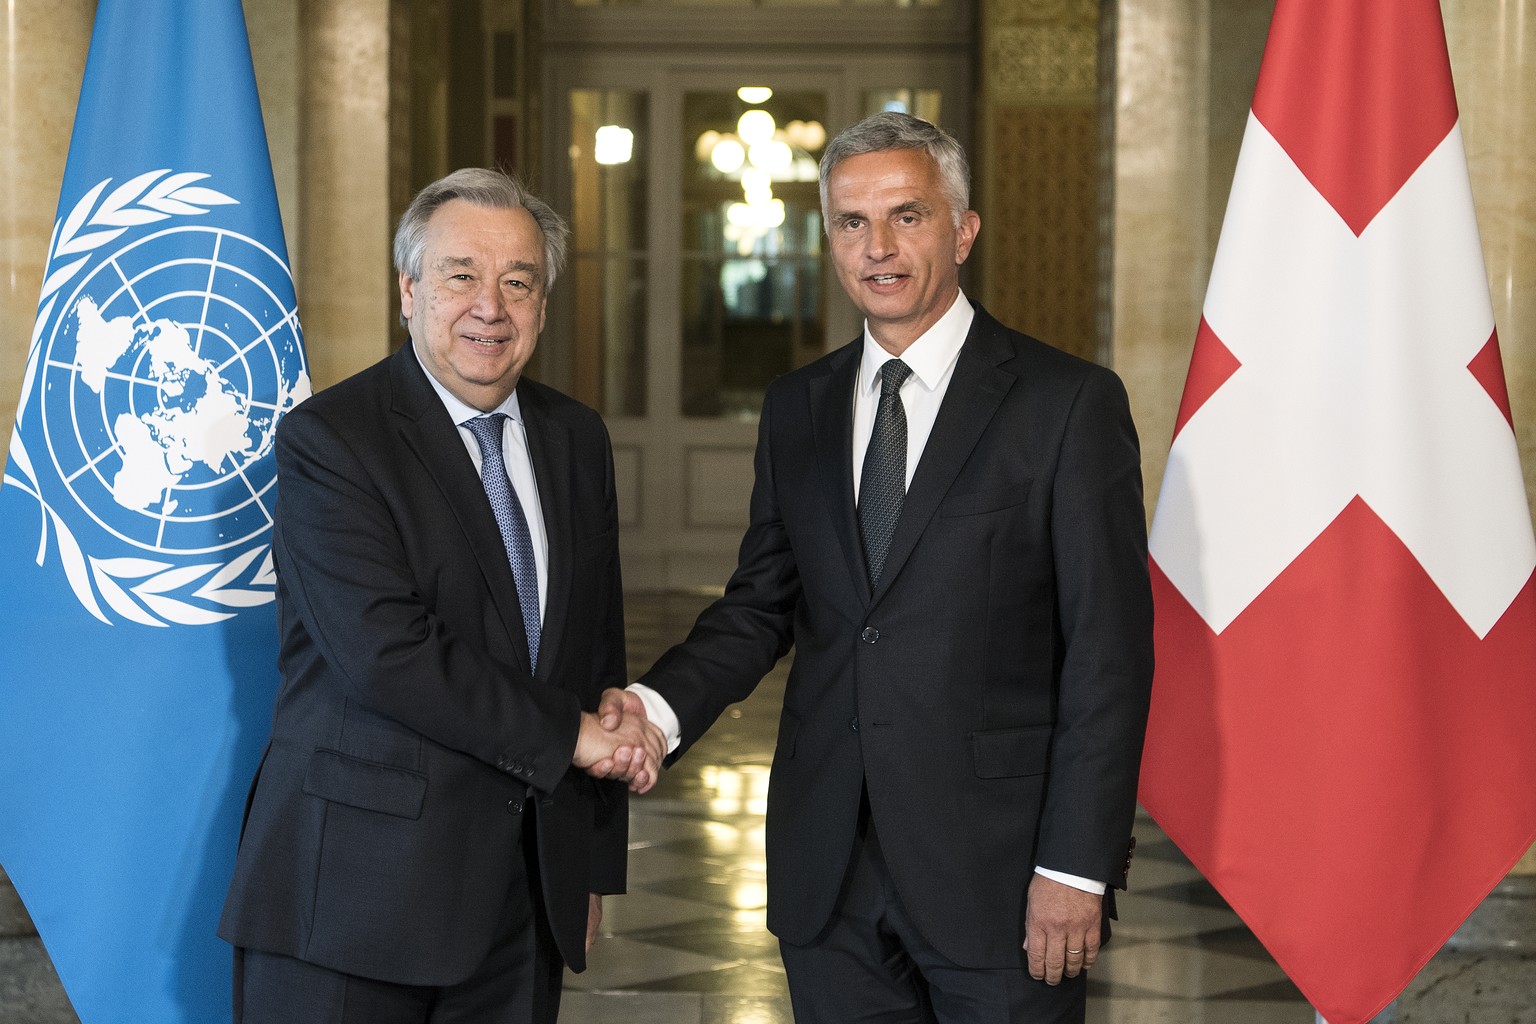 Swiss Federal Councillor and Foreign minister Didier Burkhalter, right, welcomes Antonio Guterres, Secretary-General of the United Nations, left, in the federal parliament building, Monday, 24 April 2 ...